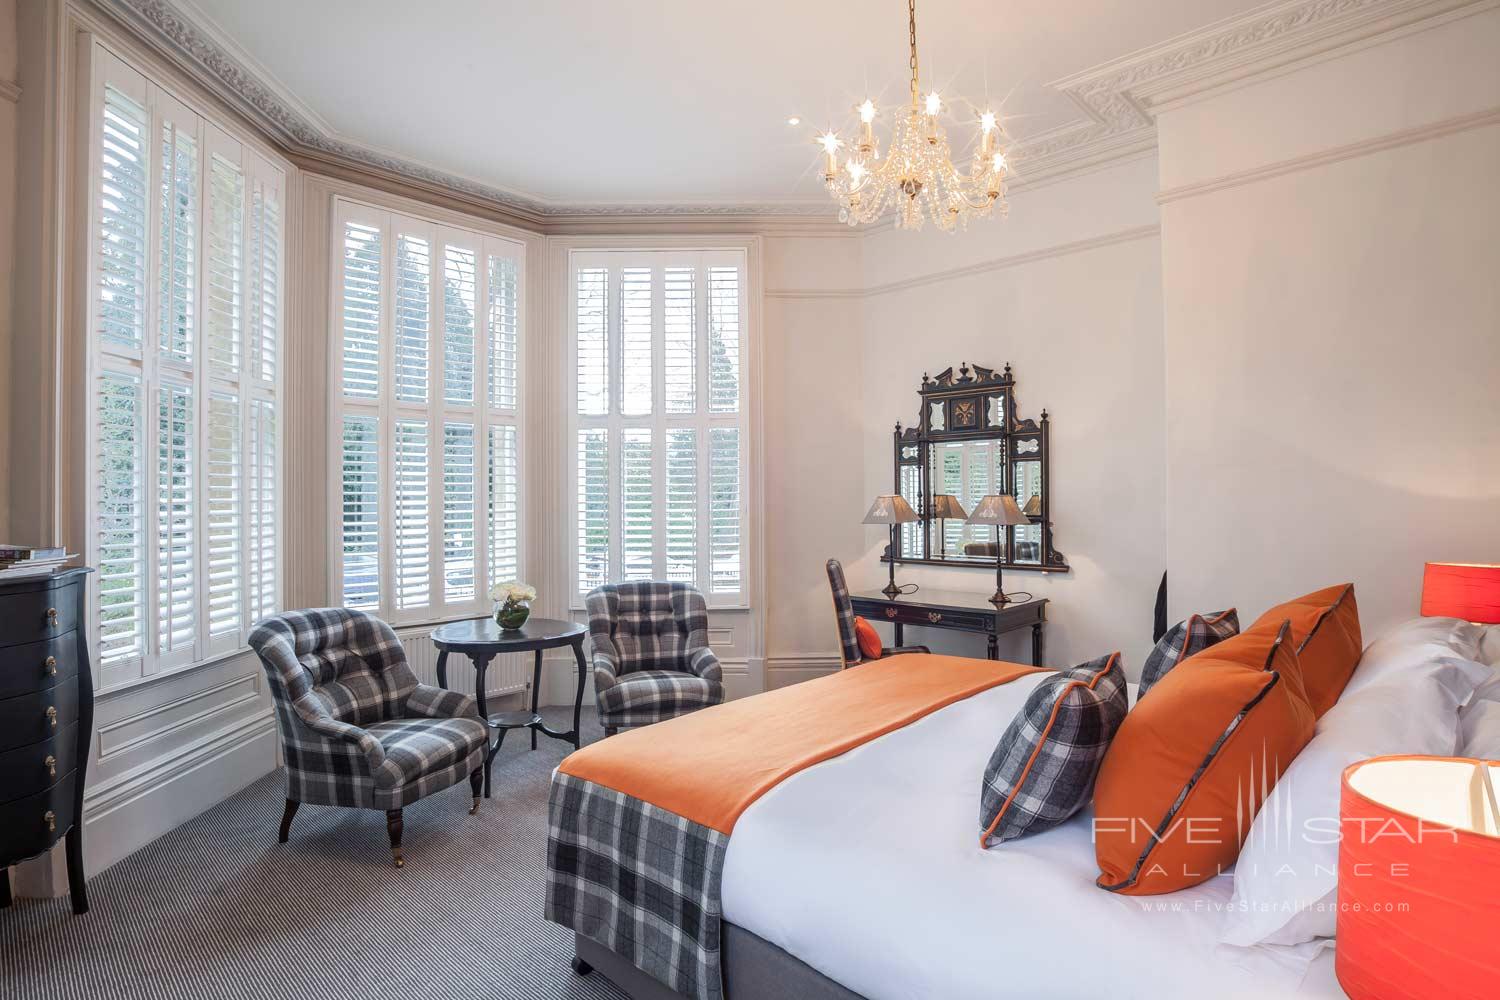 Luxury Park View Guest Room at The Roseate Villa Bath, United Kingdom